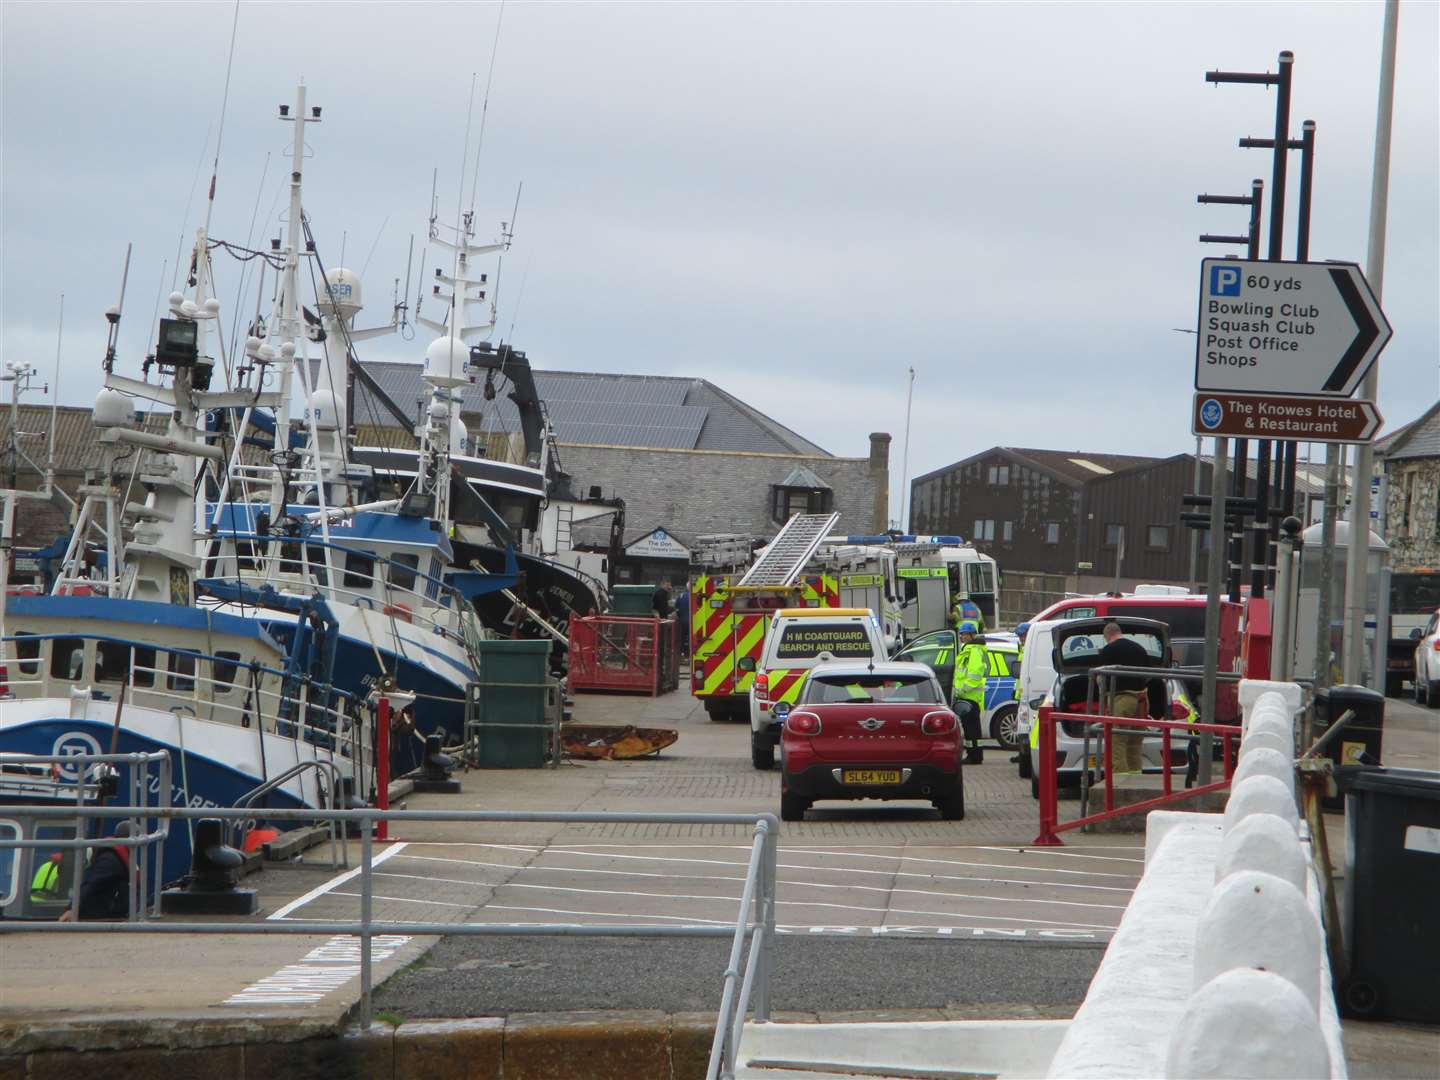 Fire crews and other emergency services were called to the boat fire at Macduff harbour.